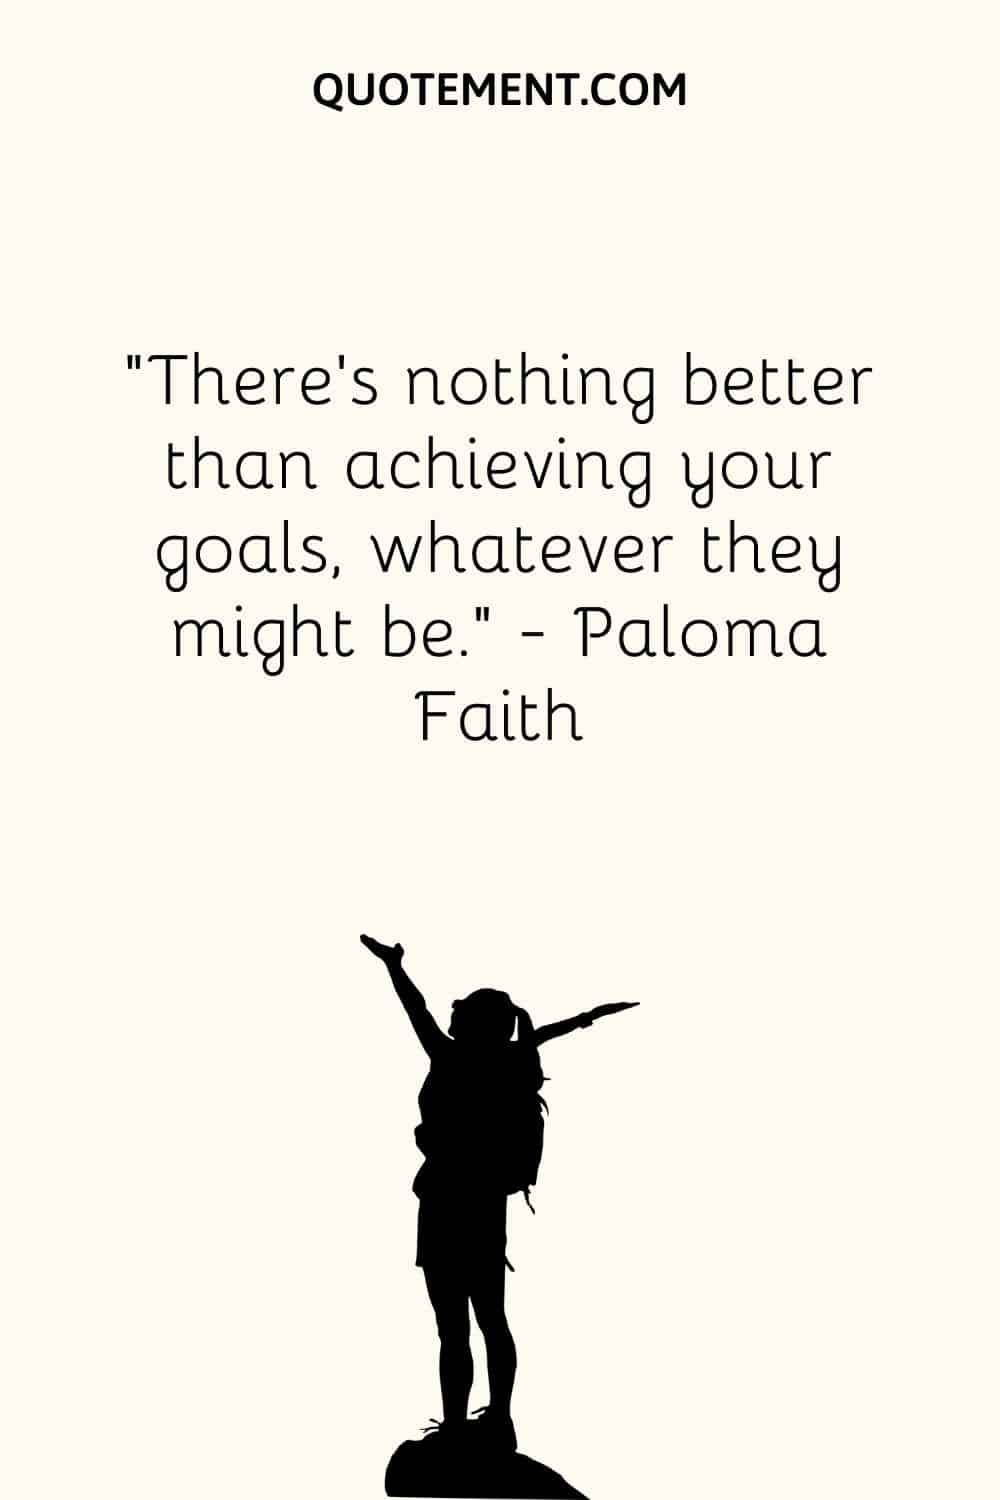 girl standing on top with arms spread illustration representing reaching goals quote